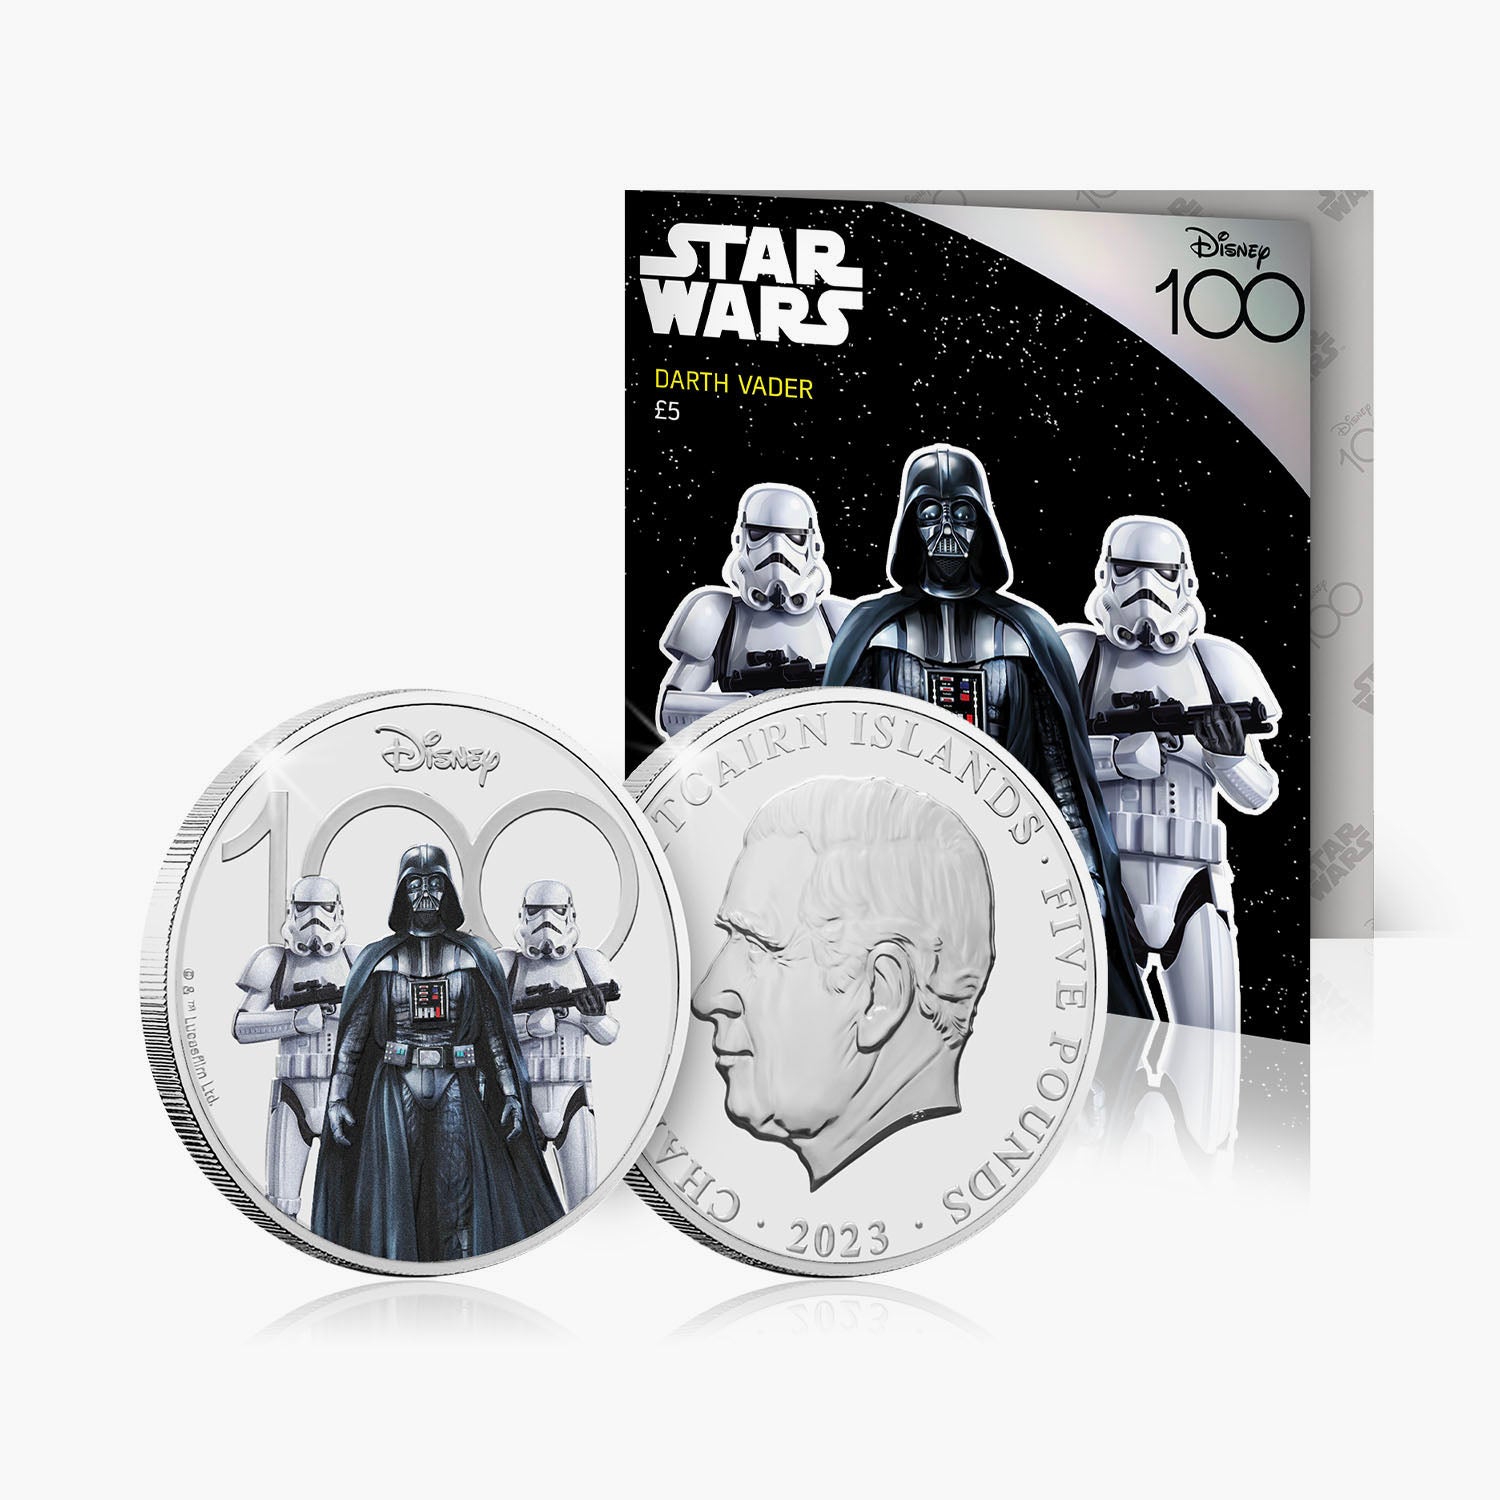 Star Wars Darth Vader and Storm Troopers 2023 £5 BU Colour Coin